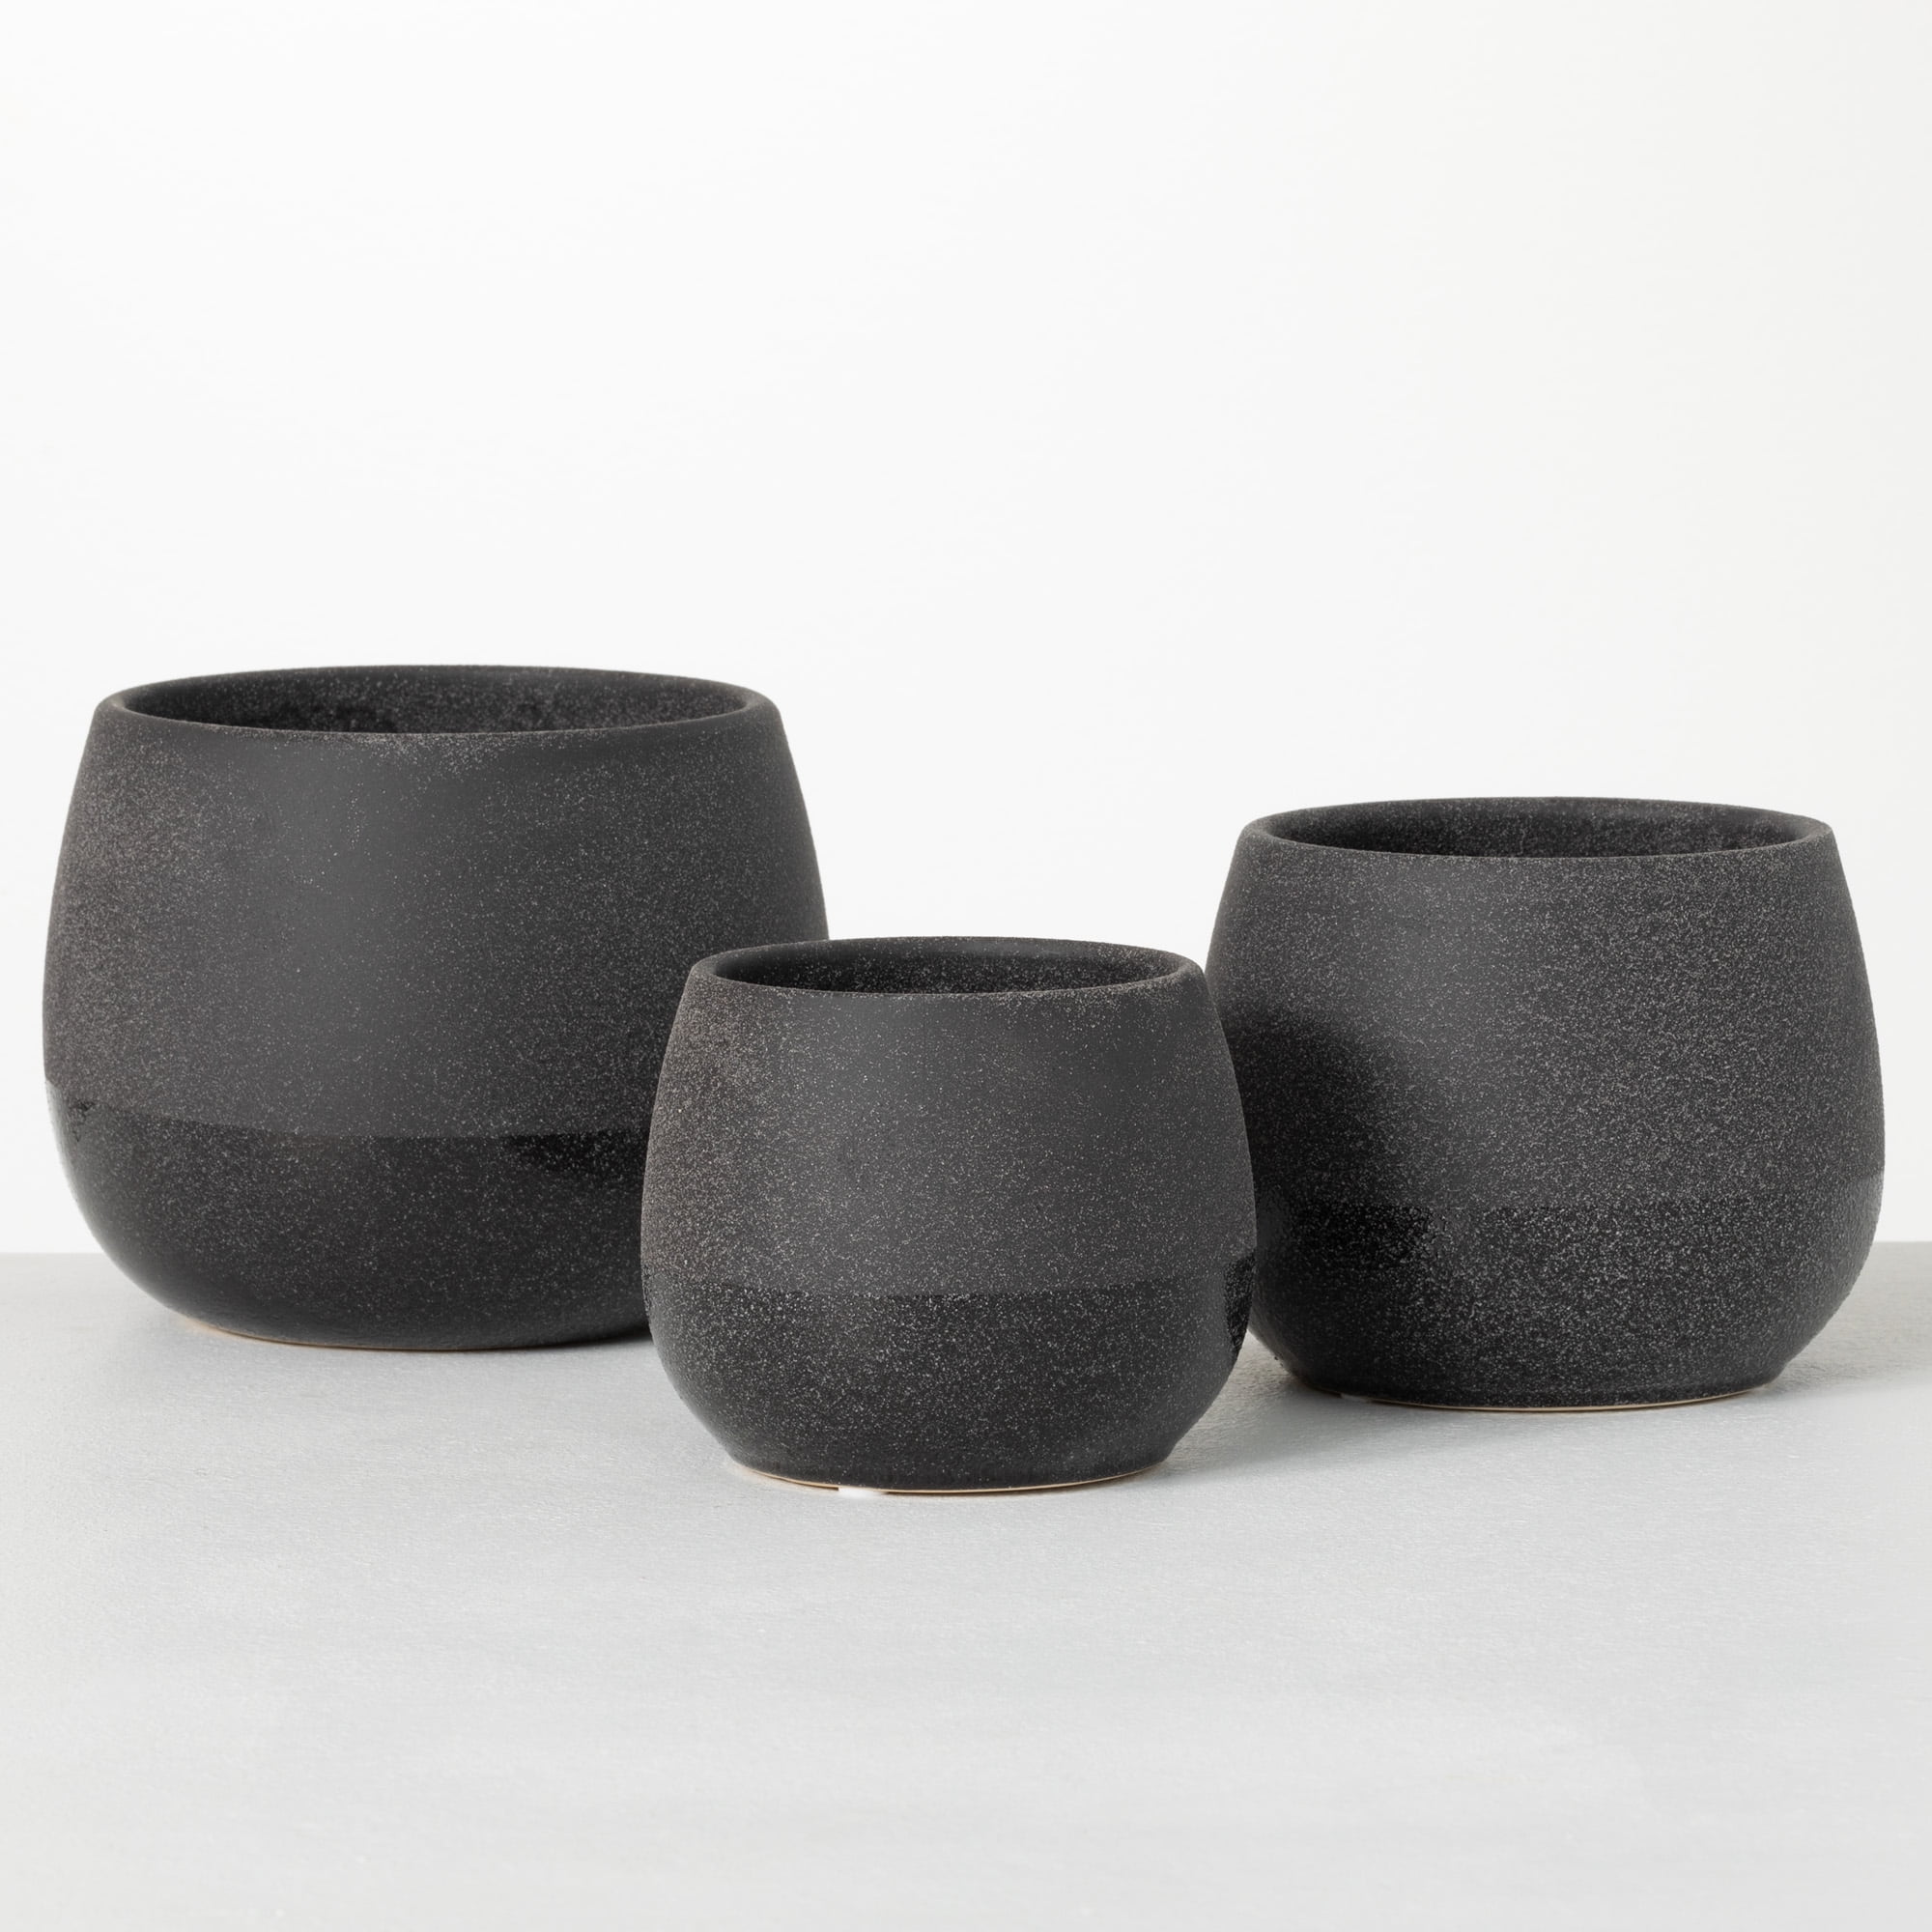 SHPROUT 6 inch (Small), 9 inch (Medium) and 12 inch (Large) - Set of 3  Speckled Black Planters, Hand Glazed Ceramic Pots with Drainage Holes and  Plug